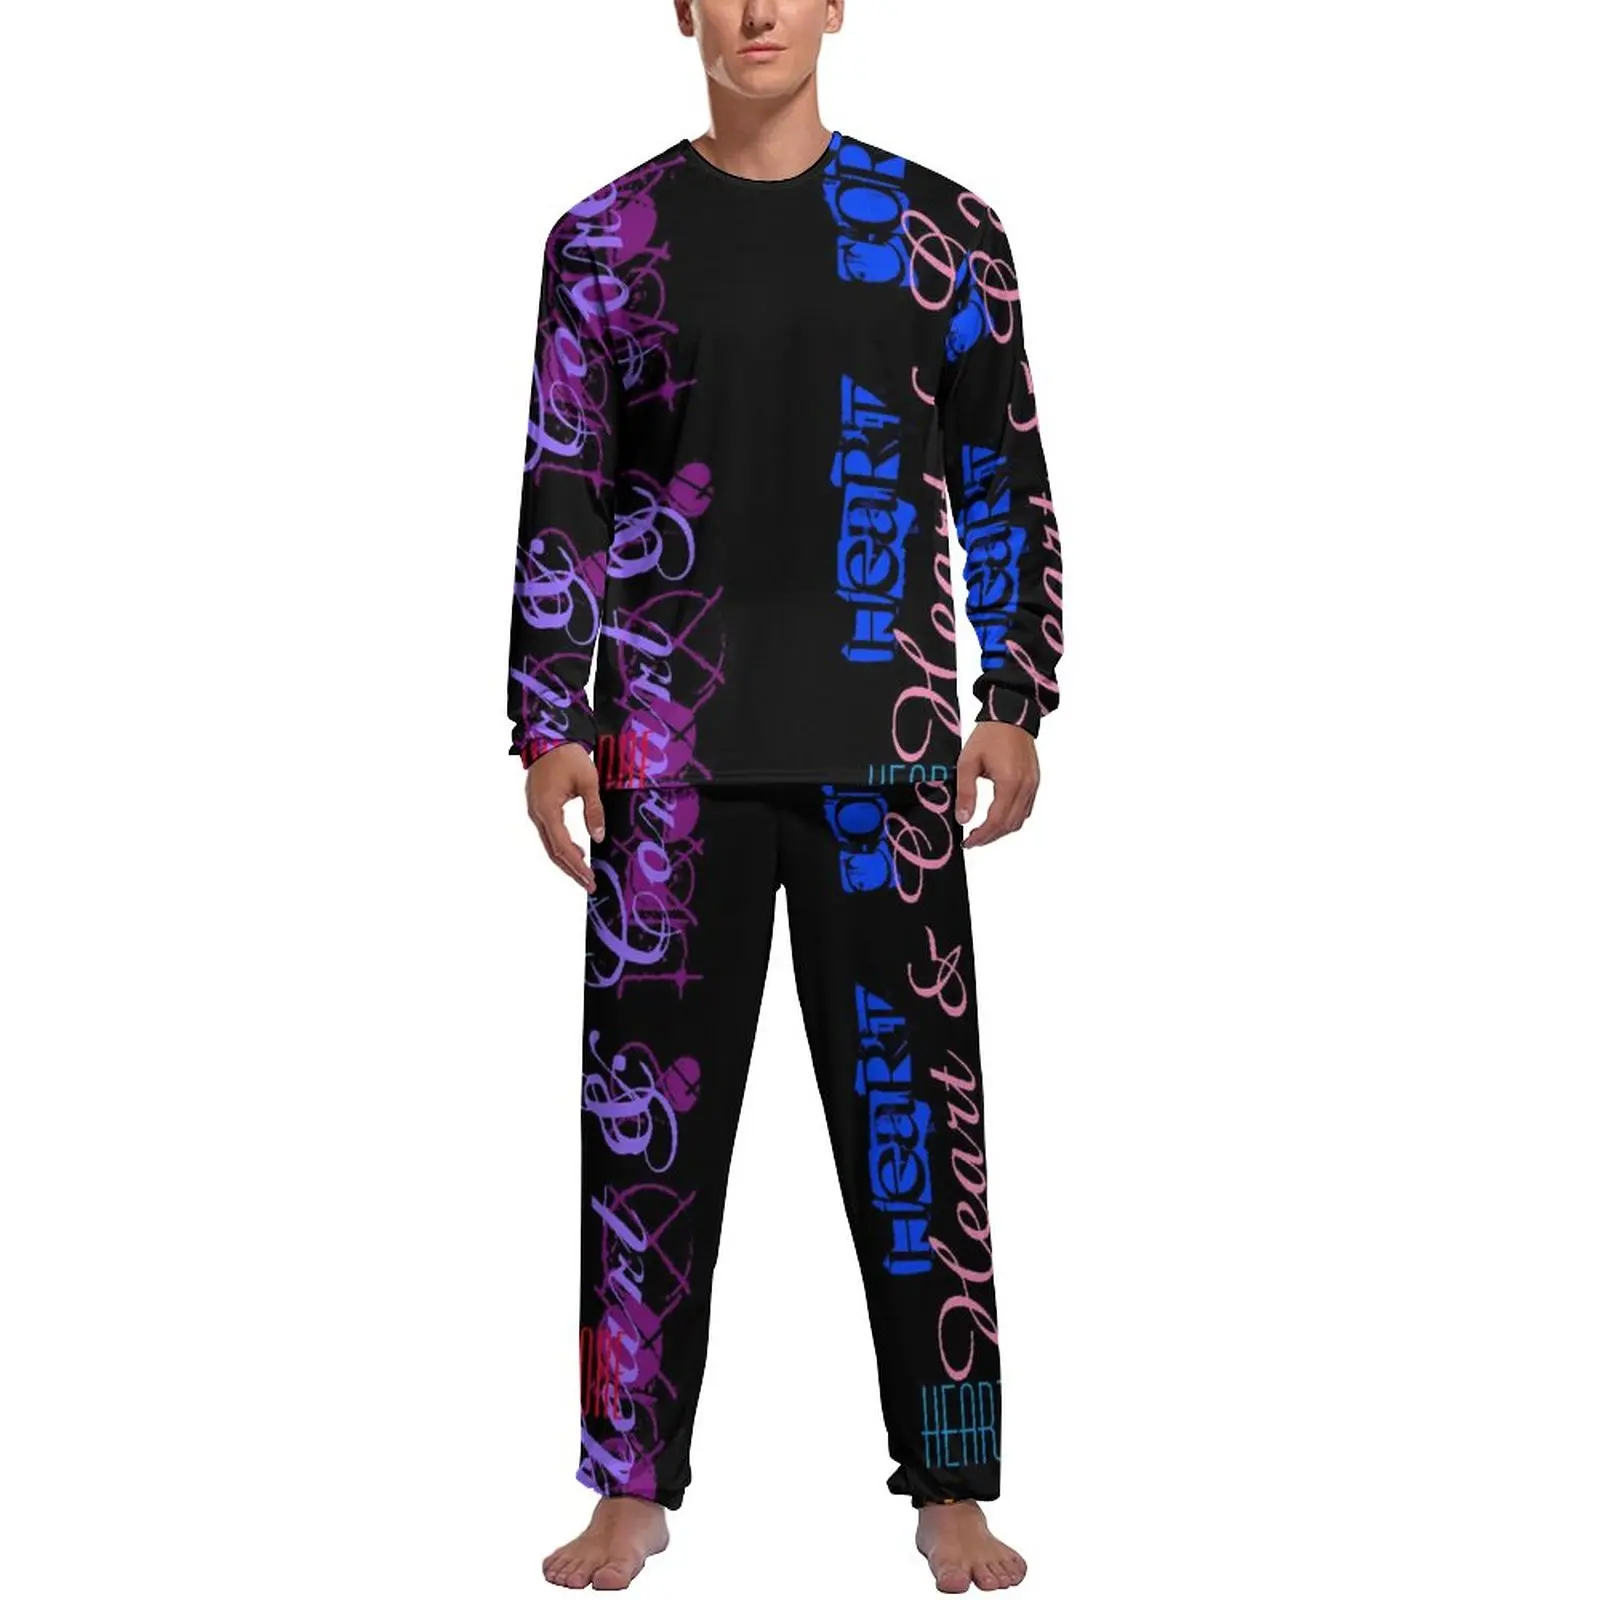 Abstract Letter Print Pajamas Daily Heart and Core Casual Sleepwear Man 2 Pieces Graphic Long Sleeves Cute Pajama Sets